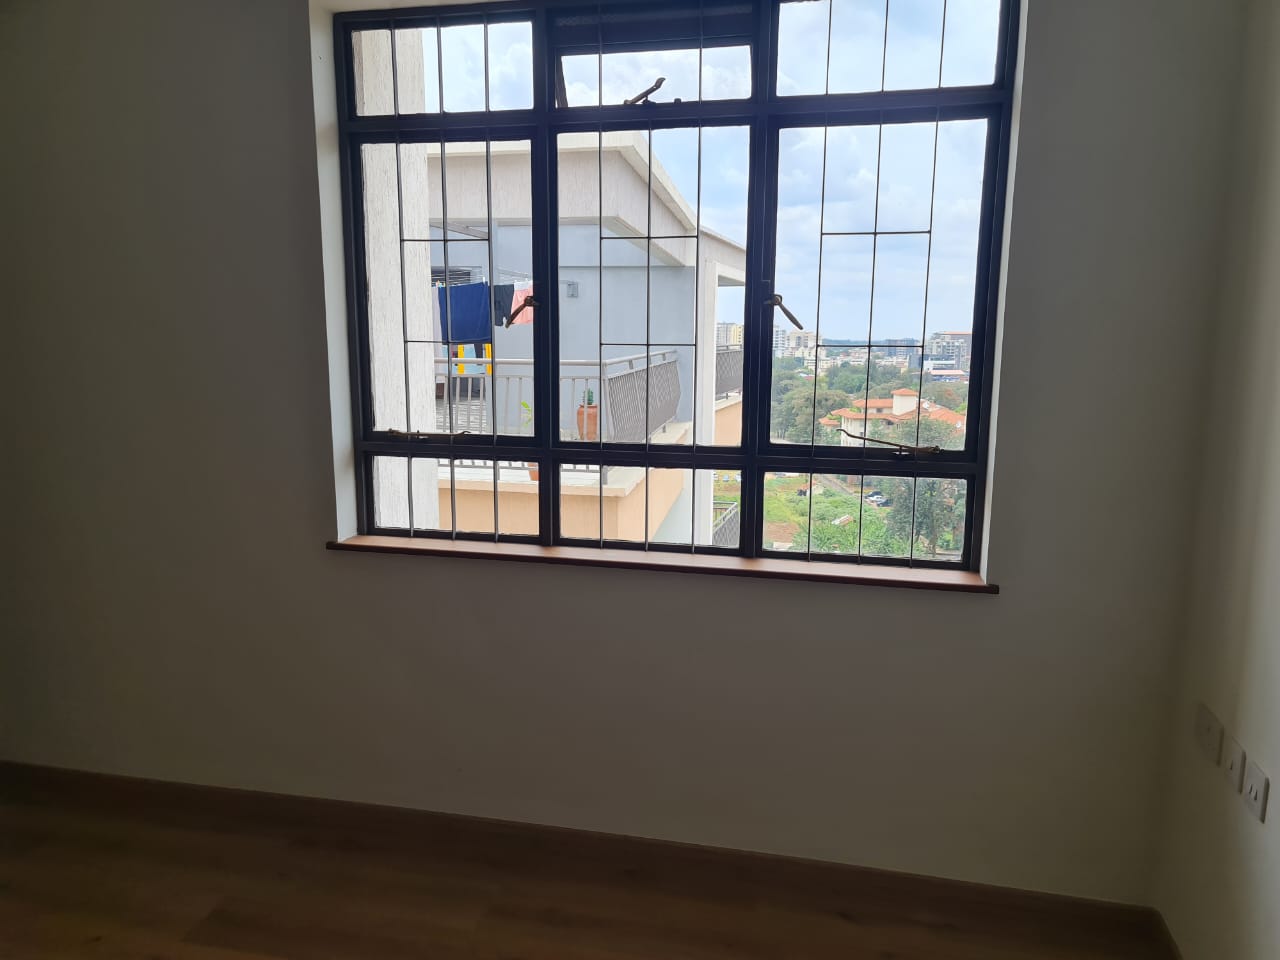 4 Bedroom New Penthouse for Rent in the heart of Westlands with great views, lift, borehole, power backup generator For Rent at Ksh160k (10)